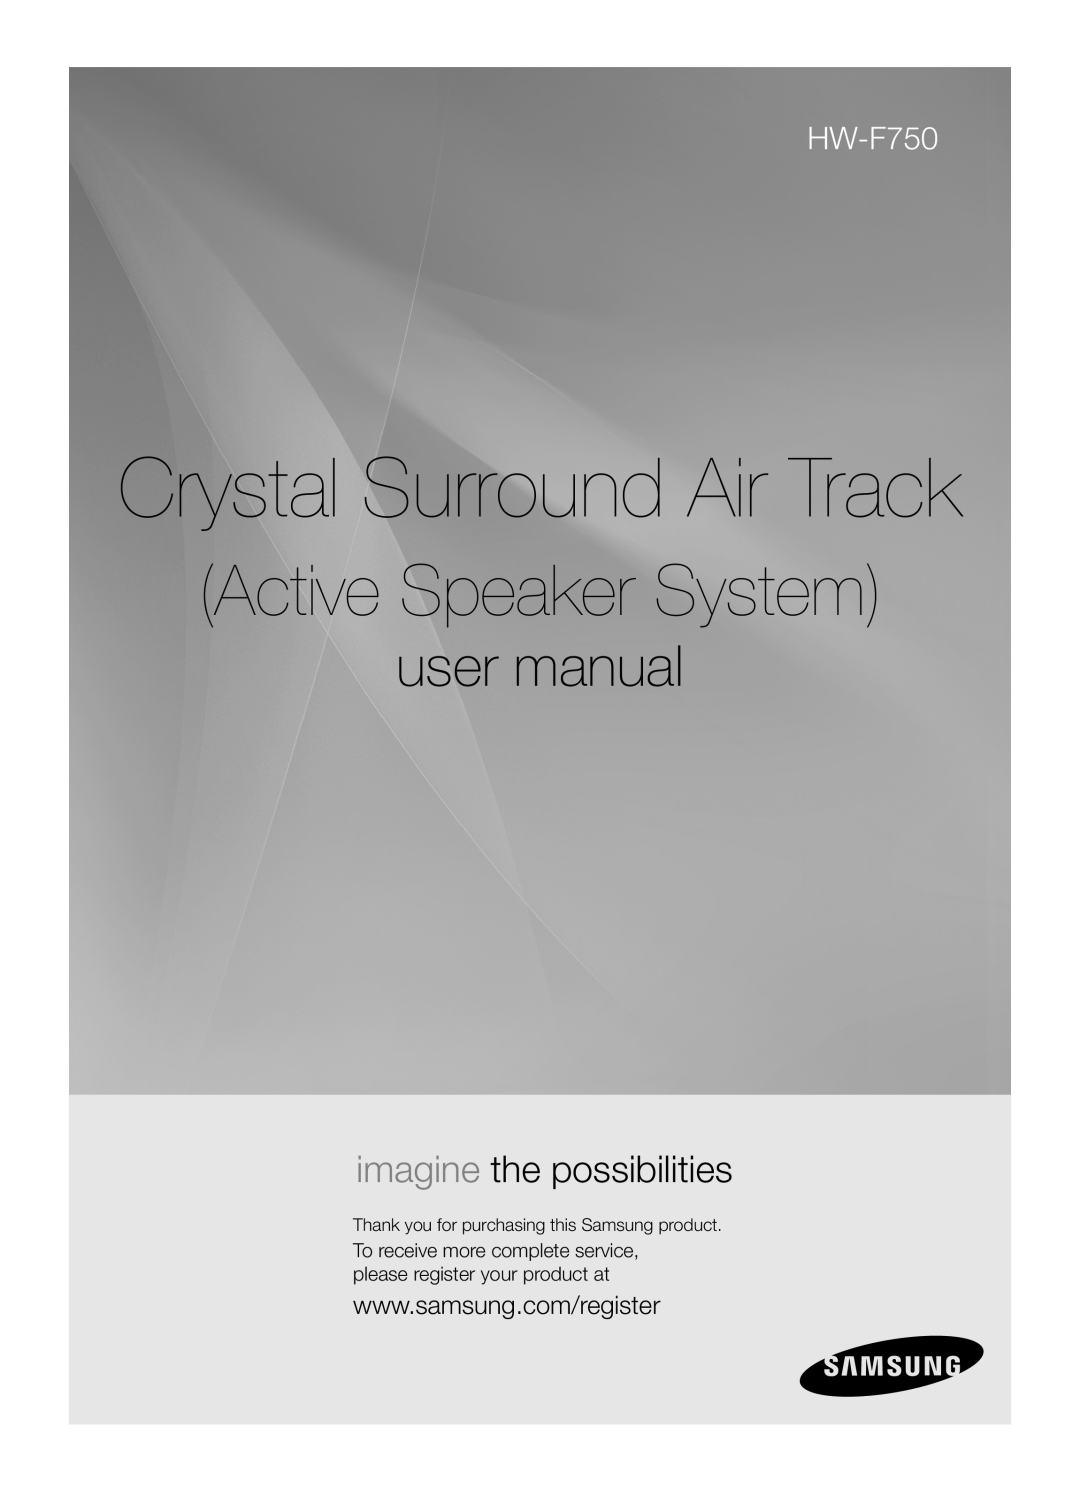 Samsung HW F750 user manual Crystal Surround Air Track, Active Speaker System, imagine the possibilities, HW-F750 